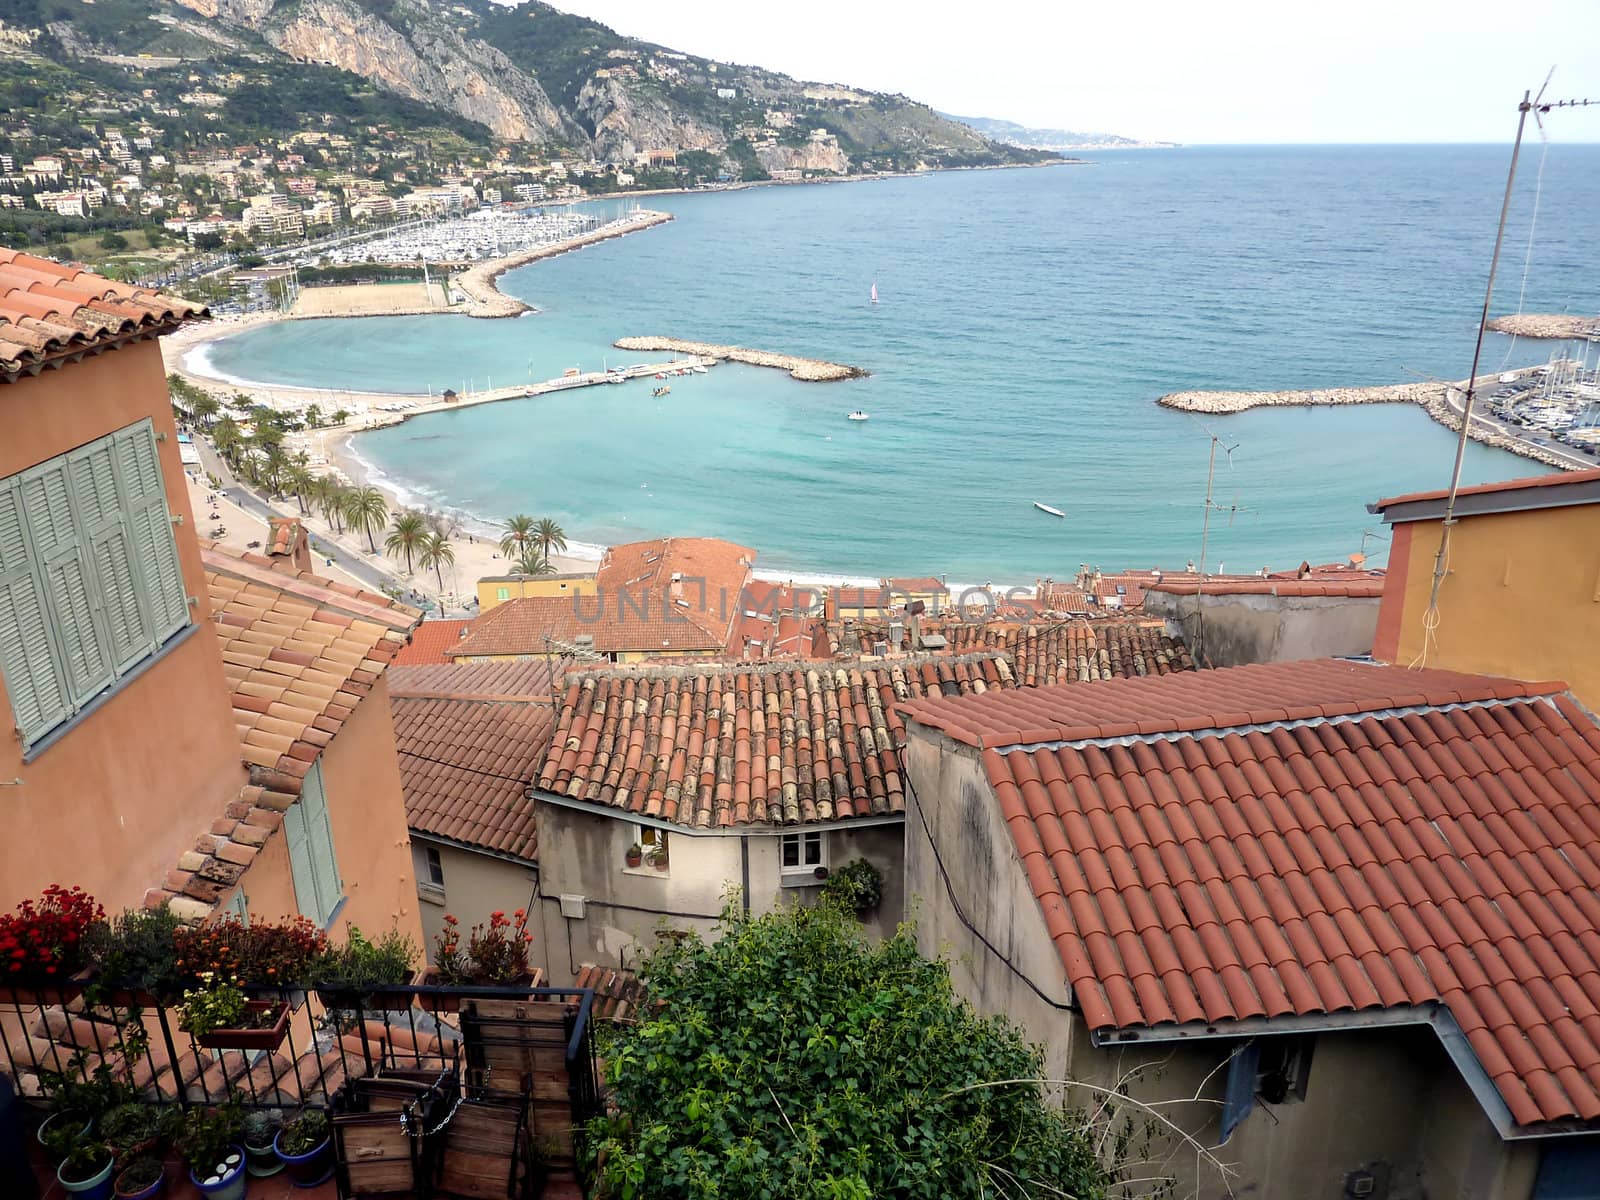 View of Menton seaside, France by Elenaphotos21